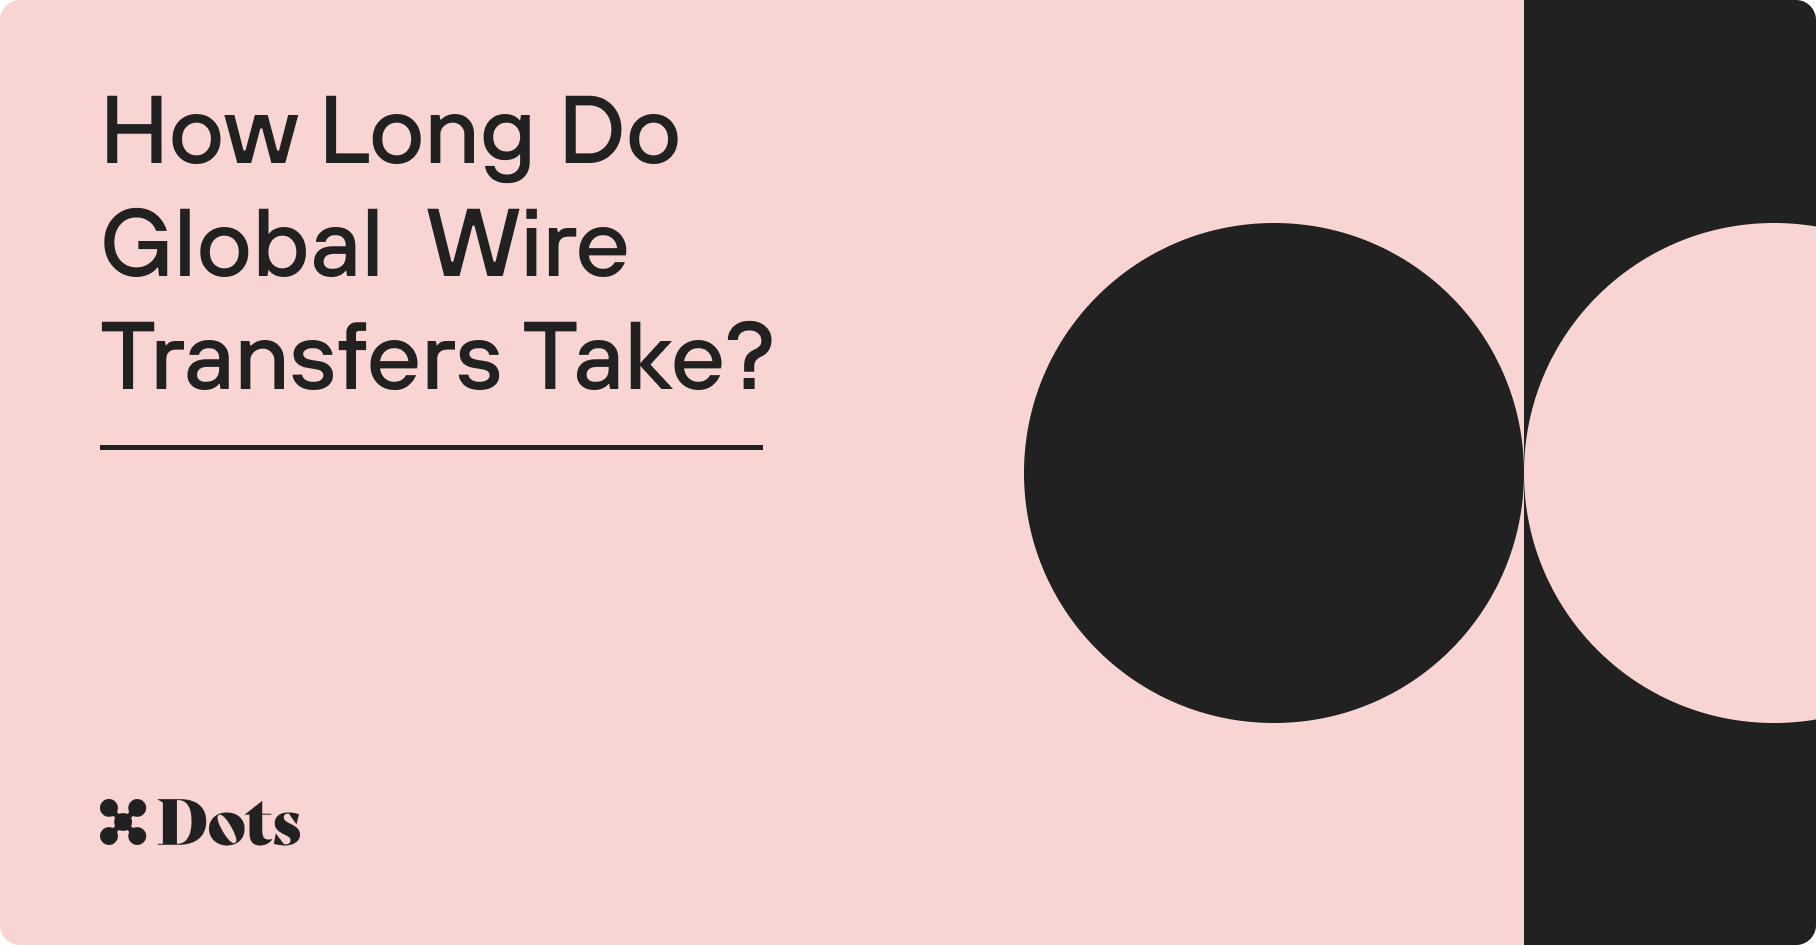 How Long Do Global Wire Transfers Take?